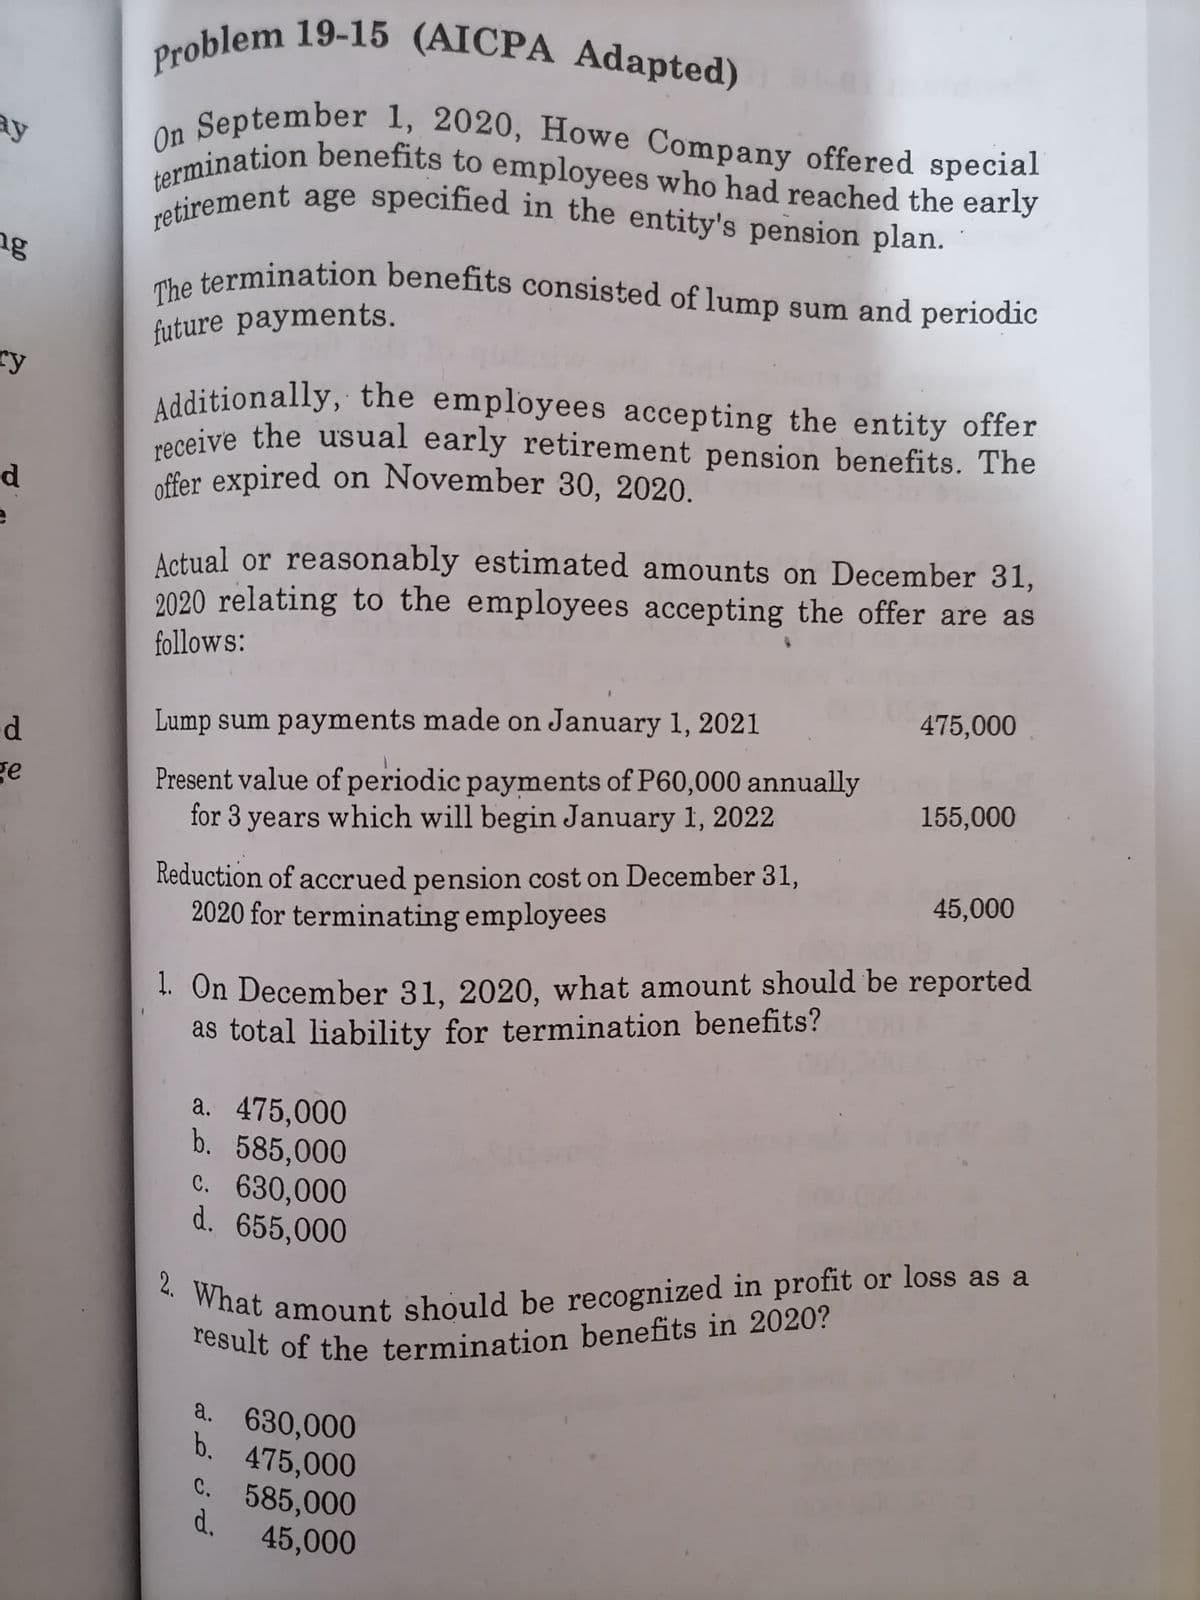 result of the termination benefits in 2020?
retirement age specified in the entity's pension plan.
offer expired on November 30, 2020.
2. What amount should be recognized in profit or loss as a
On September 1, 2020, Howe Company offered special
termination benefits to employees who had reached the early
The termination benefits consisted of lump sum and periodic
receive the usual early retirement pension benefits. The
Additionally, the employees accepting the entity offer
Problem 19-15 (AICPA Adapted)
ay
ng
future payments.
ry
Additionally, the employees accepting the entity offer
neive the usual early retirement pension benefits. The
d.
Actual or reasonably estimated amounts on December 31,
2020 relating to the employees accepting the offer are as
follows:
475,000
Lump sum payments made on January 1, 2021
Present value of periodic payments of P60,000 annually
for 3 years which will begin January 1, 2022
ge
155,000
Reduction of accrued pension cost on December 31,
2020 for terminating employees
45,000
1. On December 31, 2020, what amount should be reported
as total liability for termination benefits?
a. 475,000
b. 585,000
c. 630,000
d. 655,000
a. 630,000
b. 475,000
c. 585,000
d.
45,000
